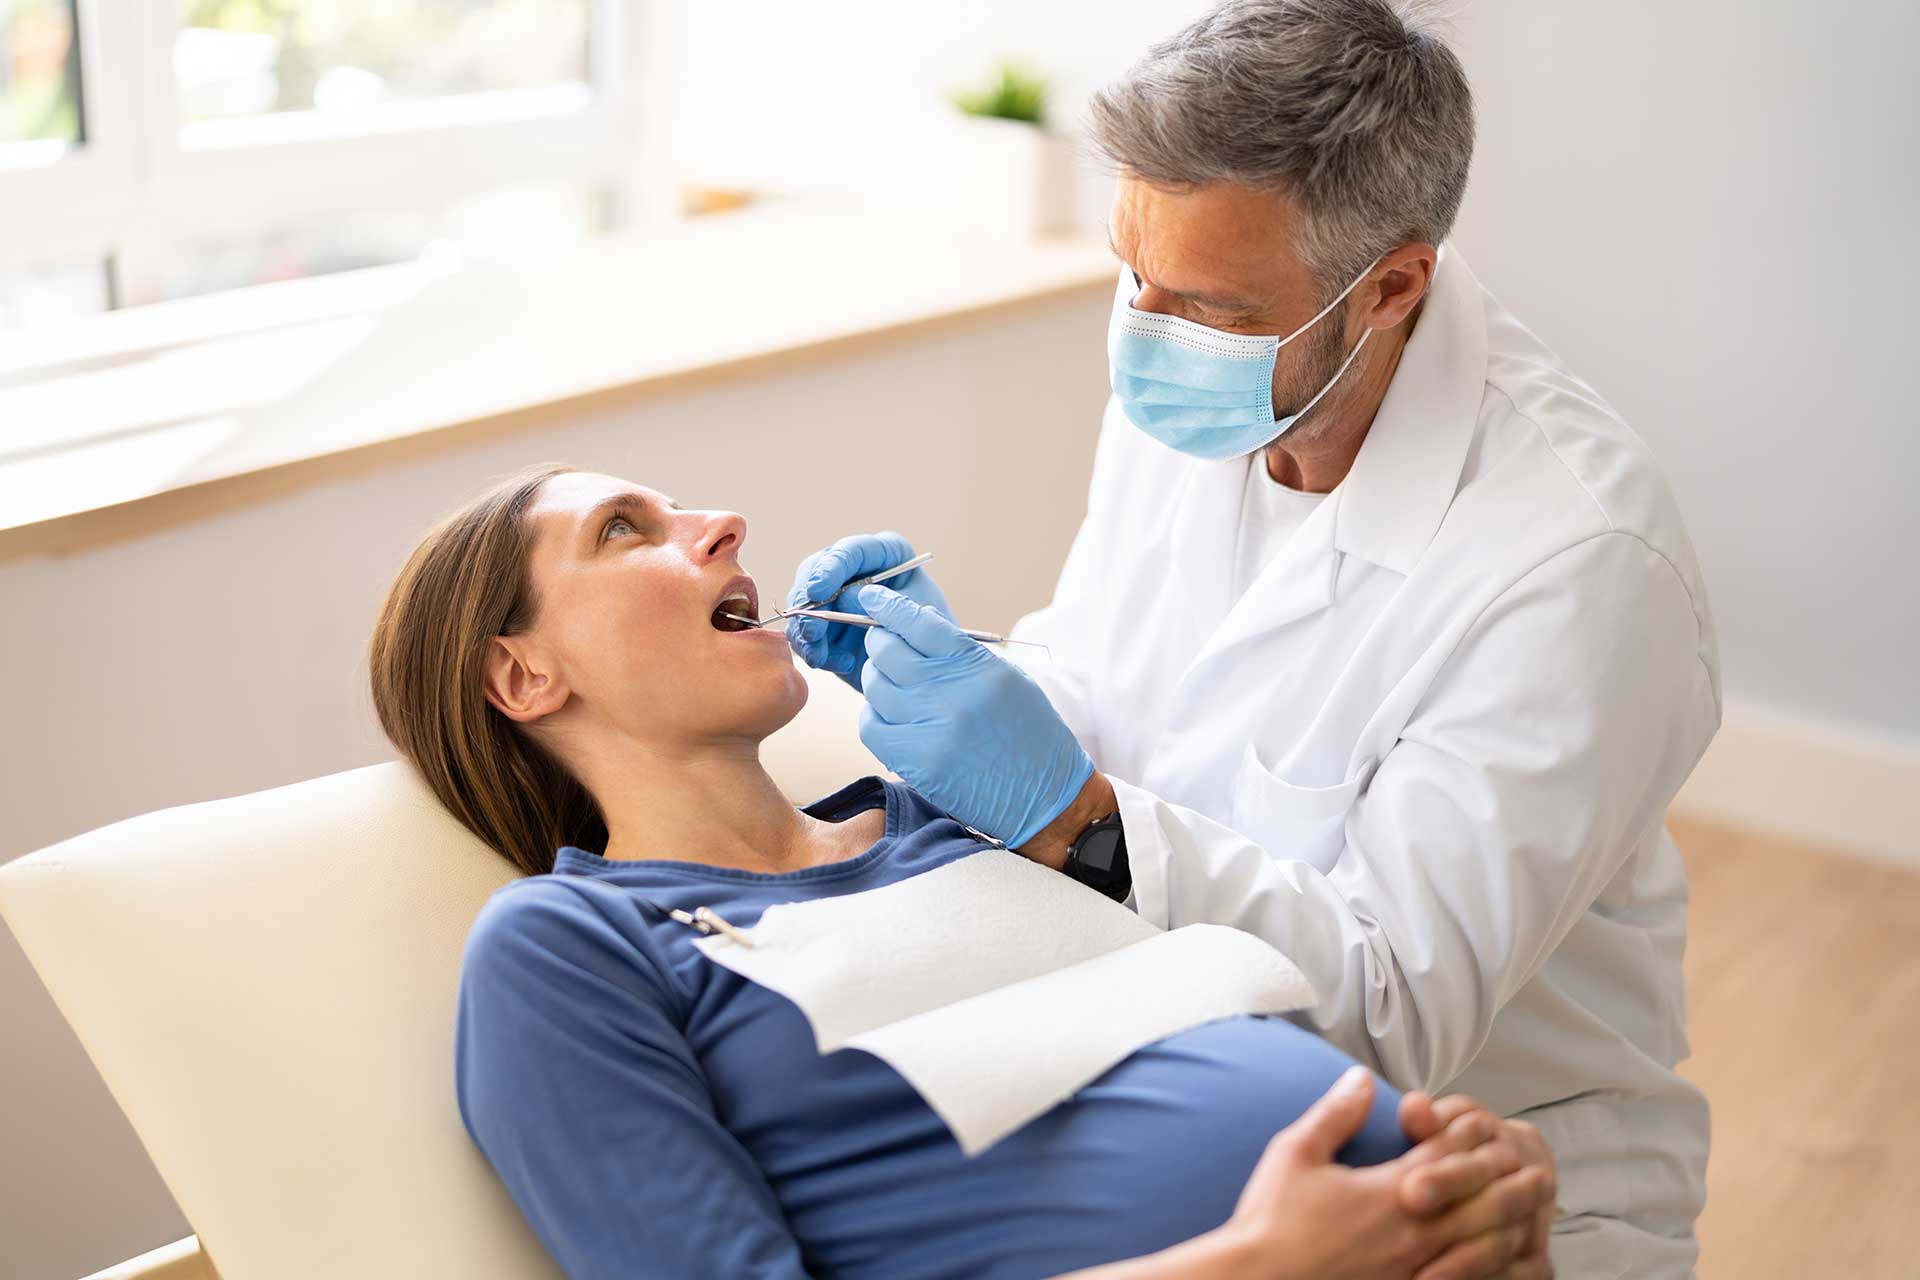 What Should You Pay Attention to for Dental Health During Pregnancy?